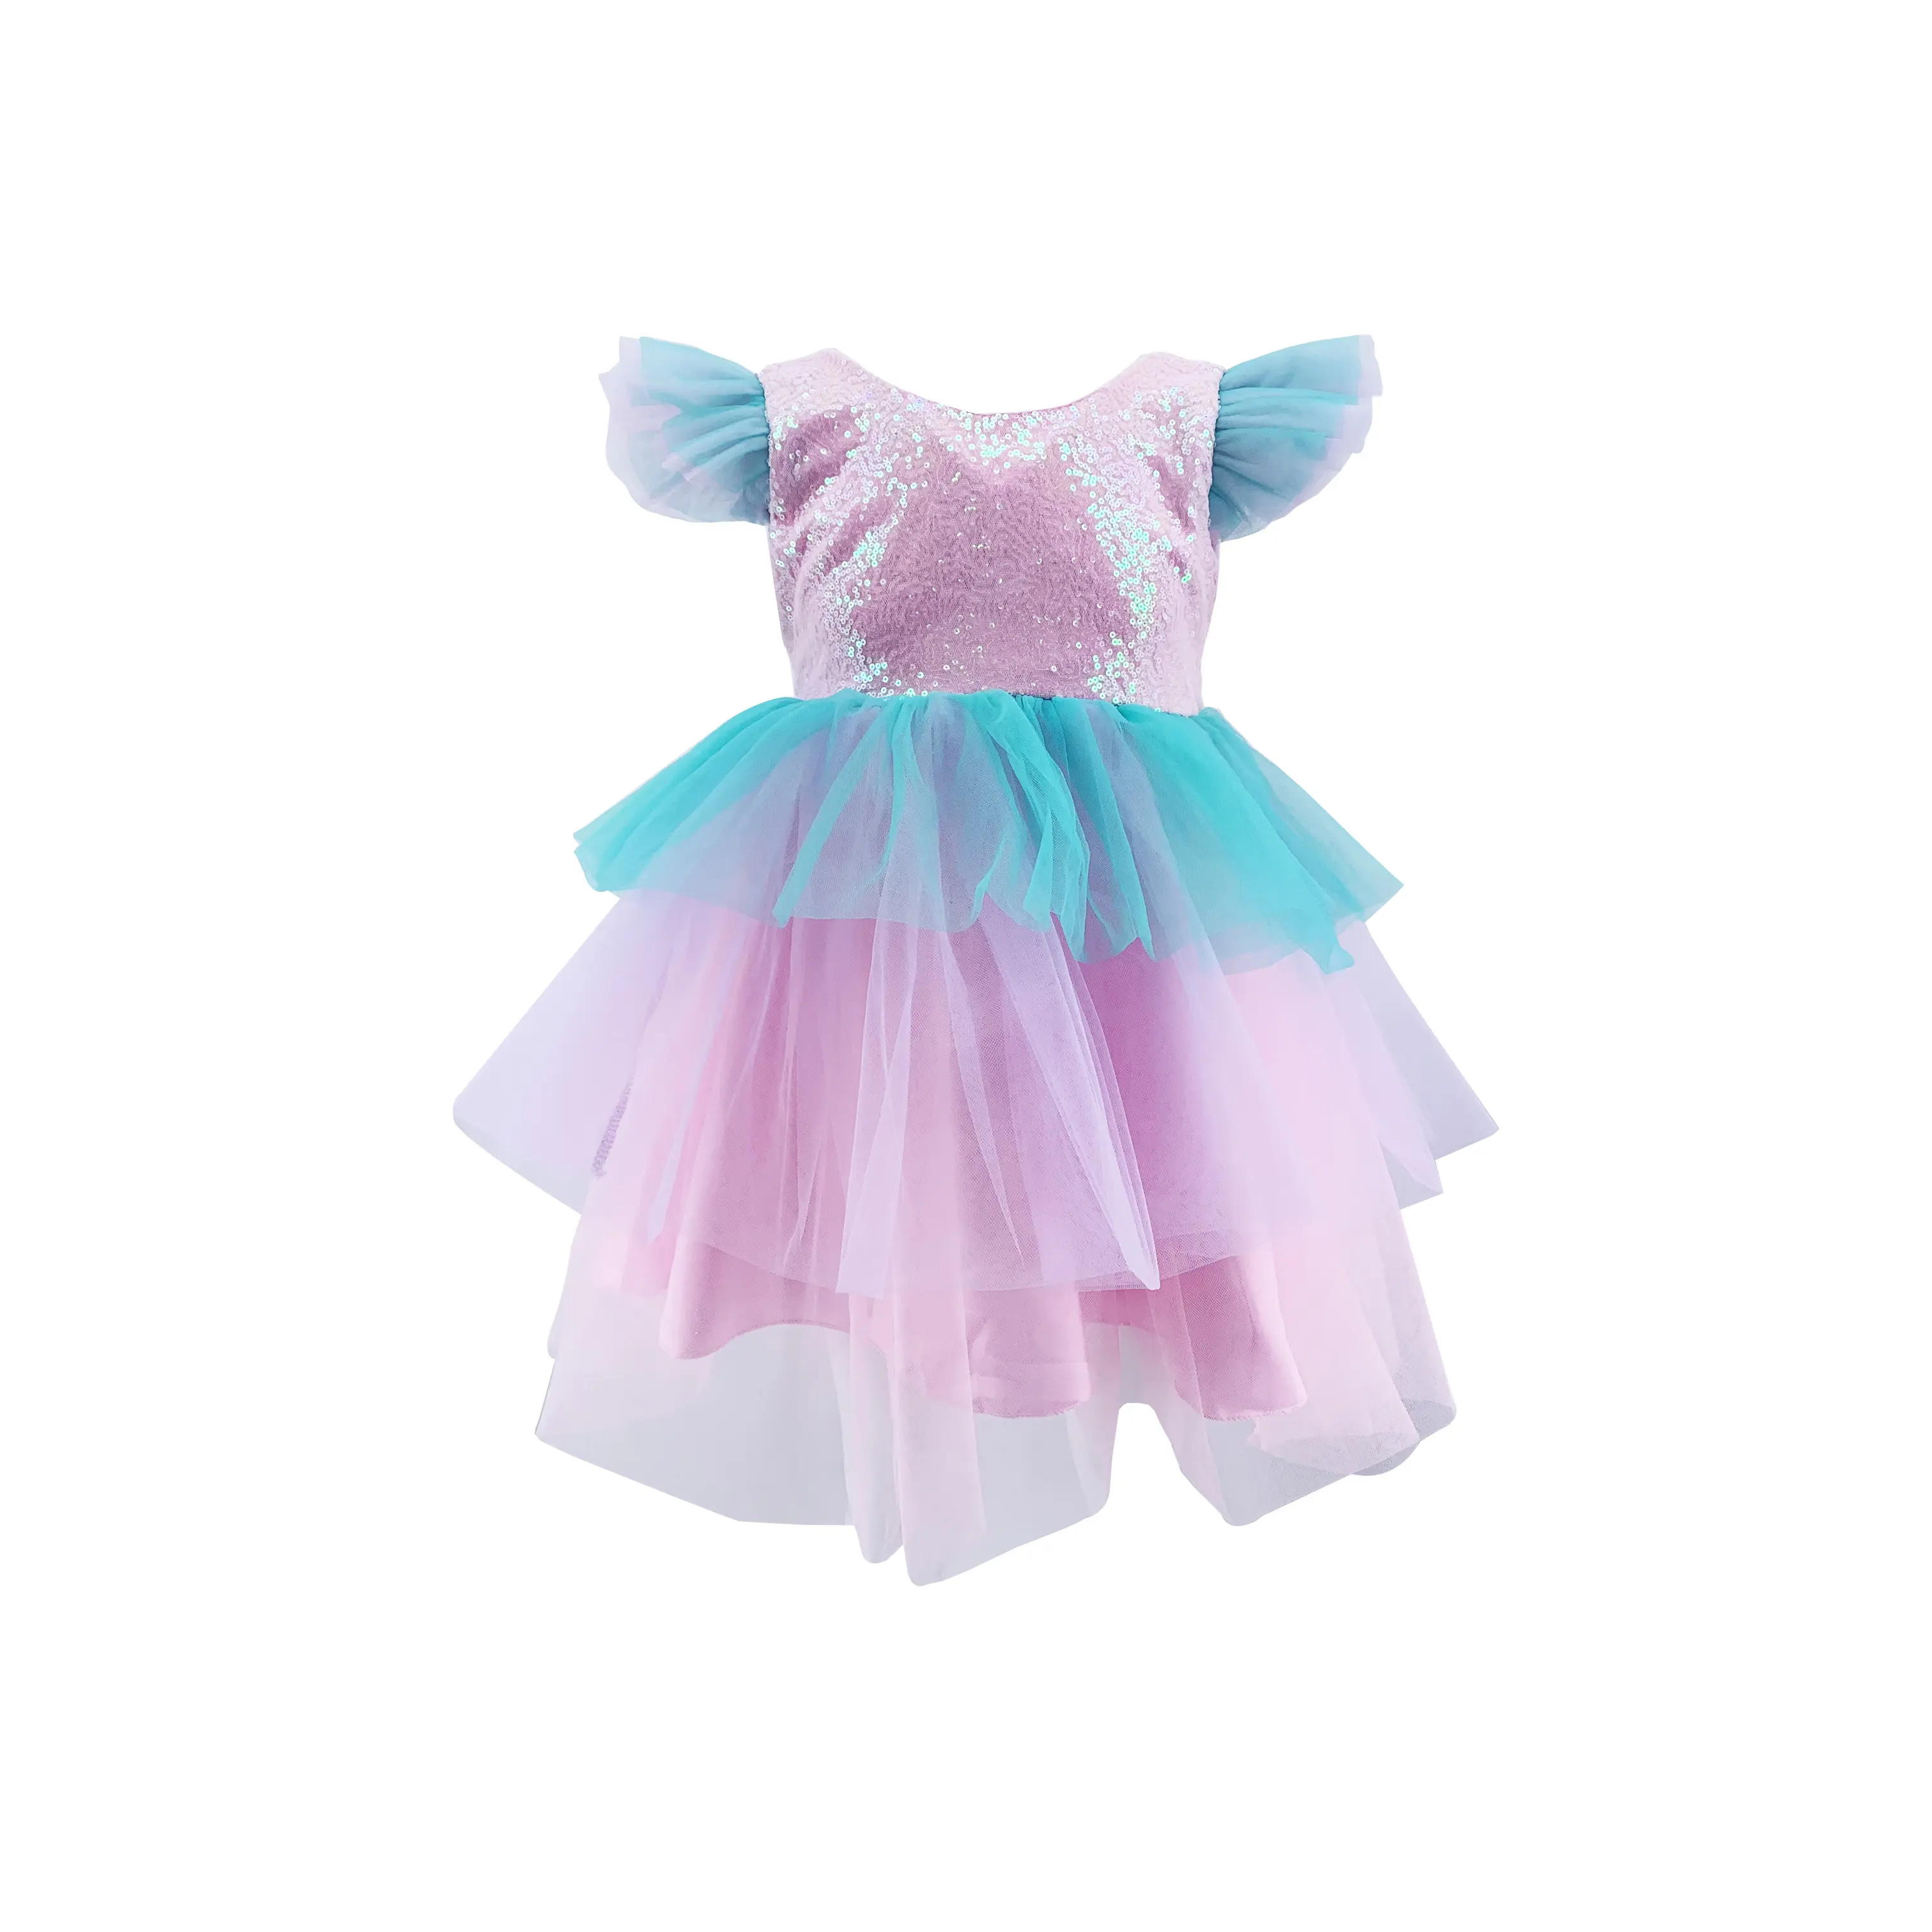 Kid Ball Gown Colorful Sequins Puff Sleeve Blue Pink Layered Dress For Birthday Party Flower Girl Princess Dresses